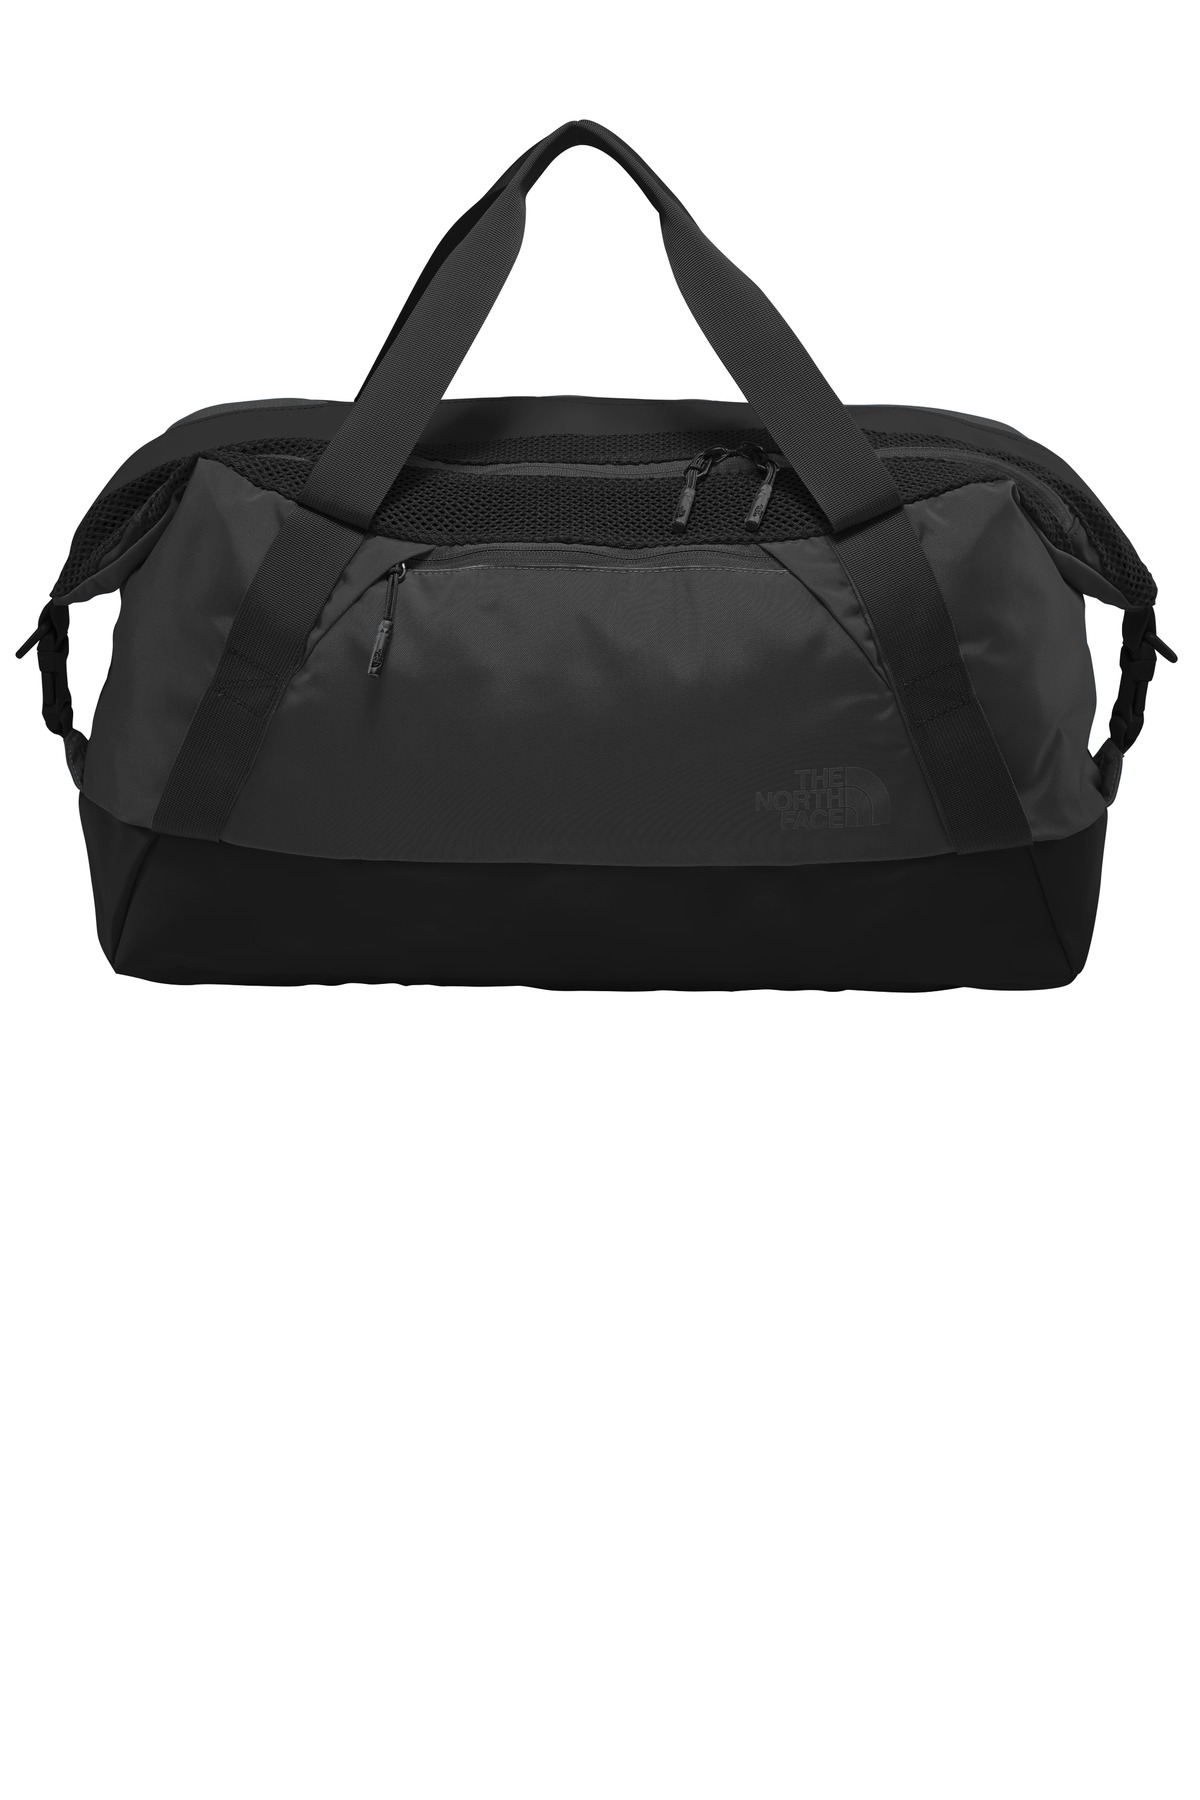 The North Face Apex Duffel. NF0A3KXX | Uniforms Today